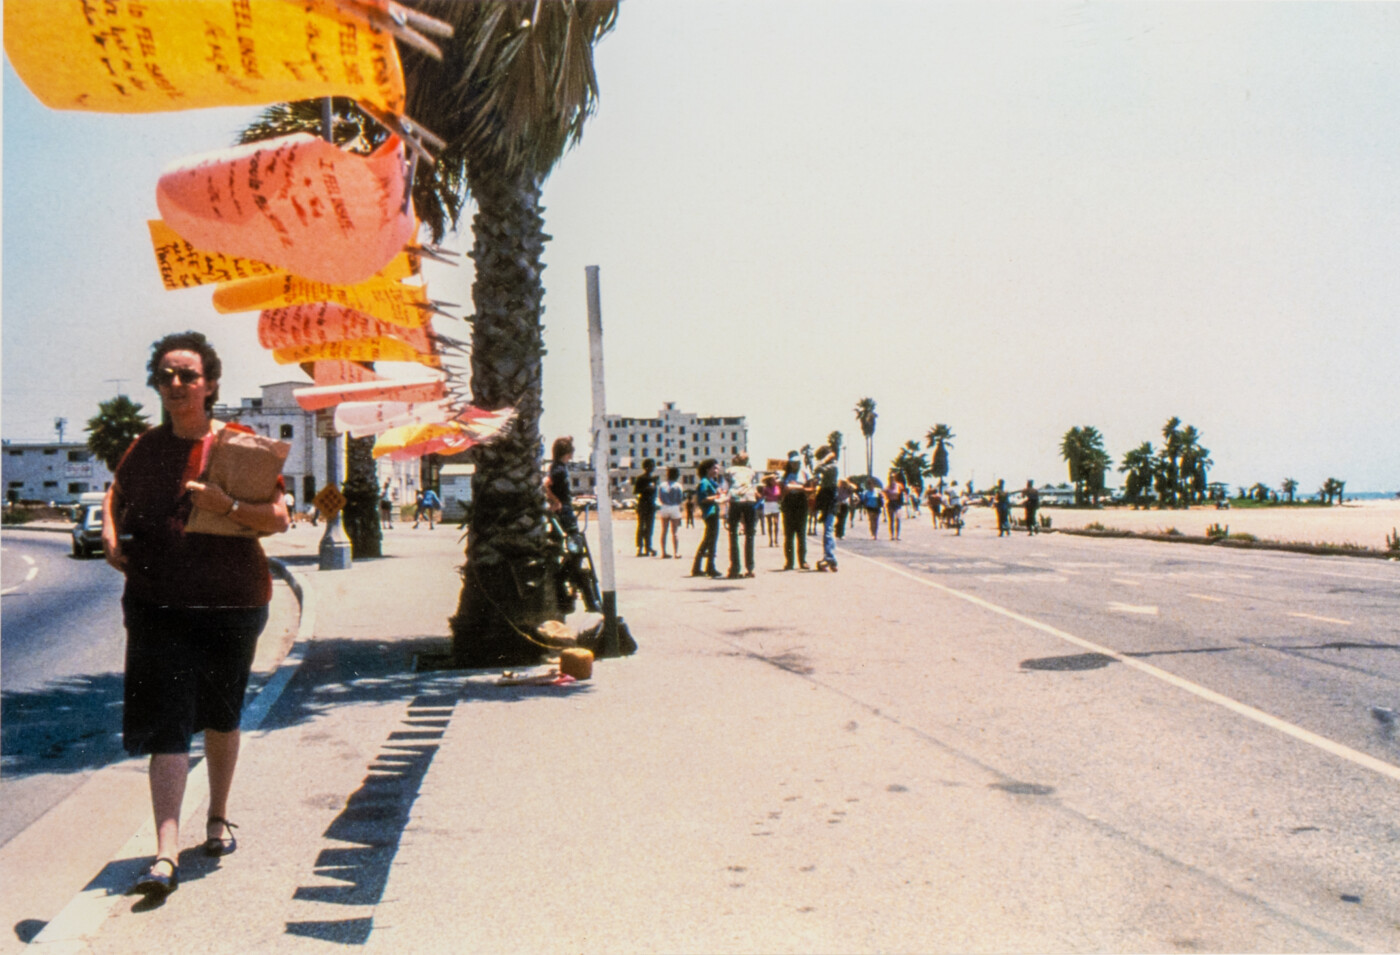 A color photograph in which a woman holding a brown paper bag walks down a sidewalk, towards the camera. Above her, pink and orange rectangles of cloth inscribed with text are suspended from a clothesline. The clothesline is tethered on one end to a palm tree visible in the foreground of the image, left of center; the other disappears in the upper left edge of the photo. To the woman’s right is a street with cars, and to her left is a paved beach-side walkway with pedestrians and runners.